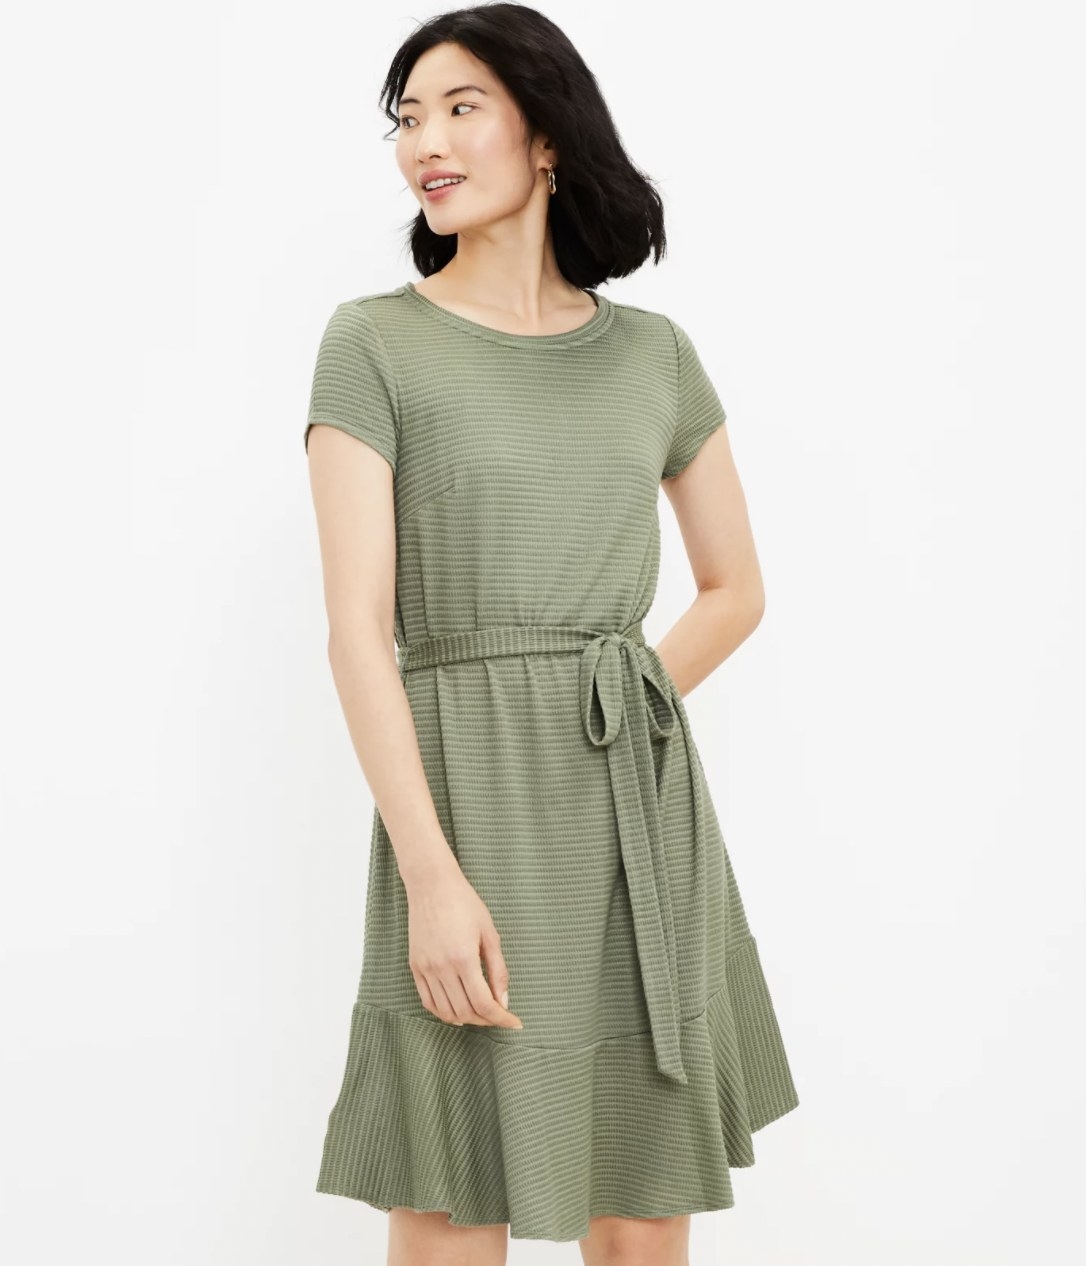 Model wearing the green short sleeve flowy dress with waist tied in a bow